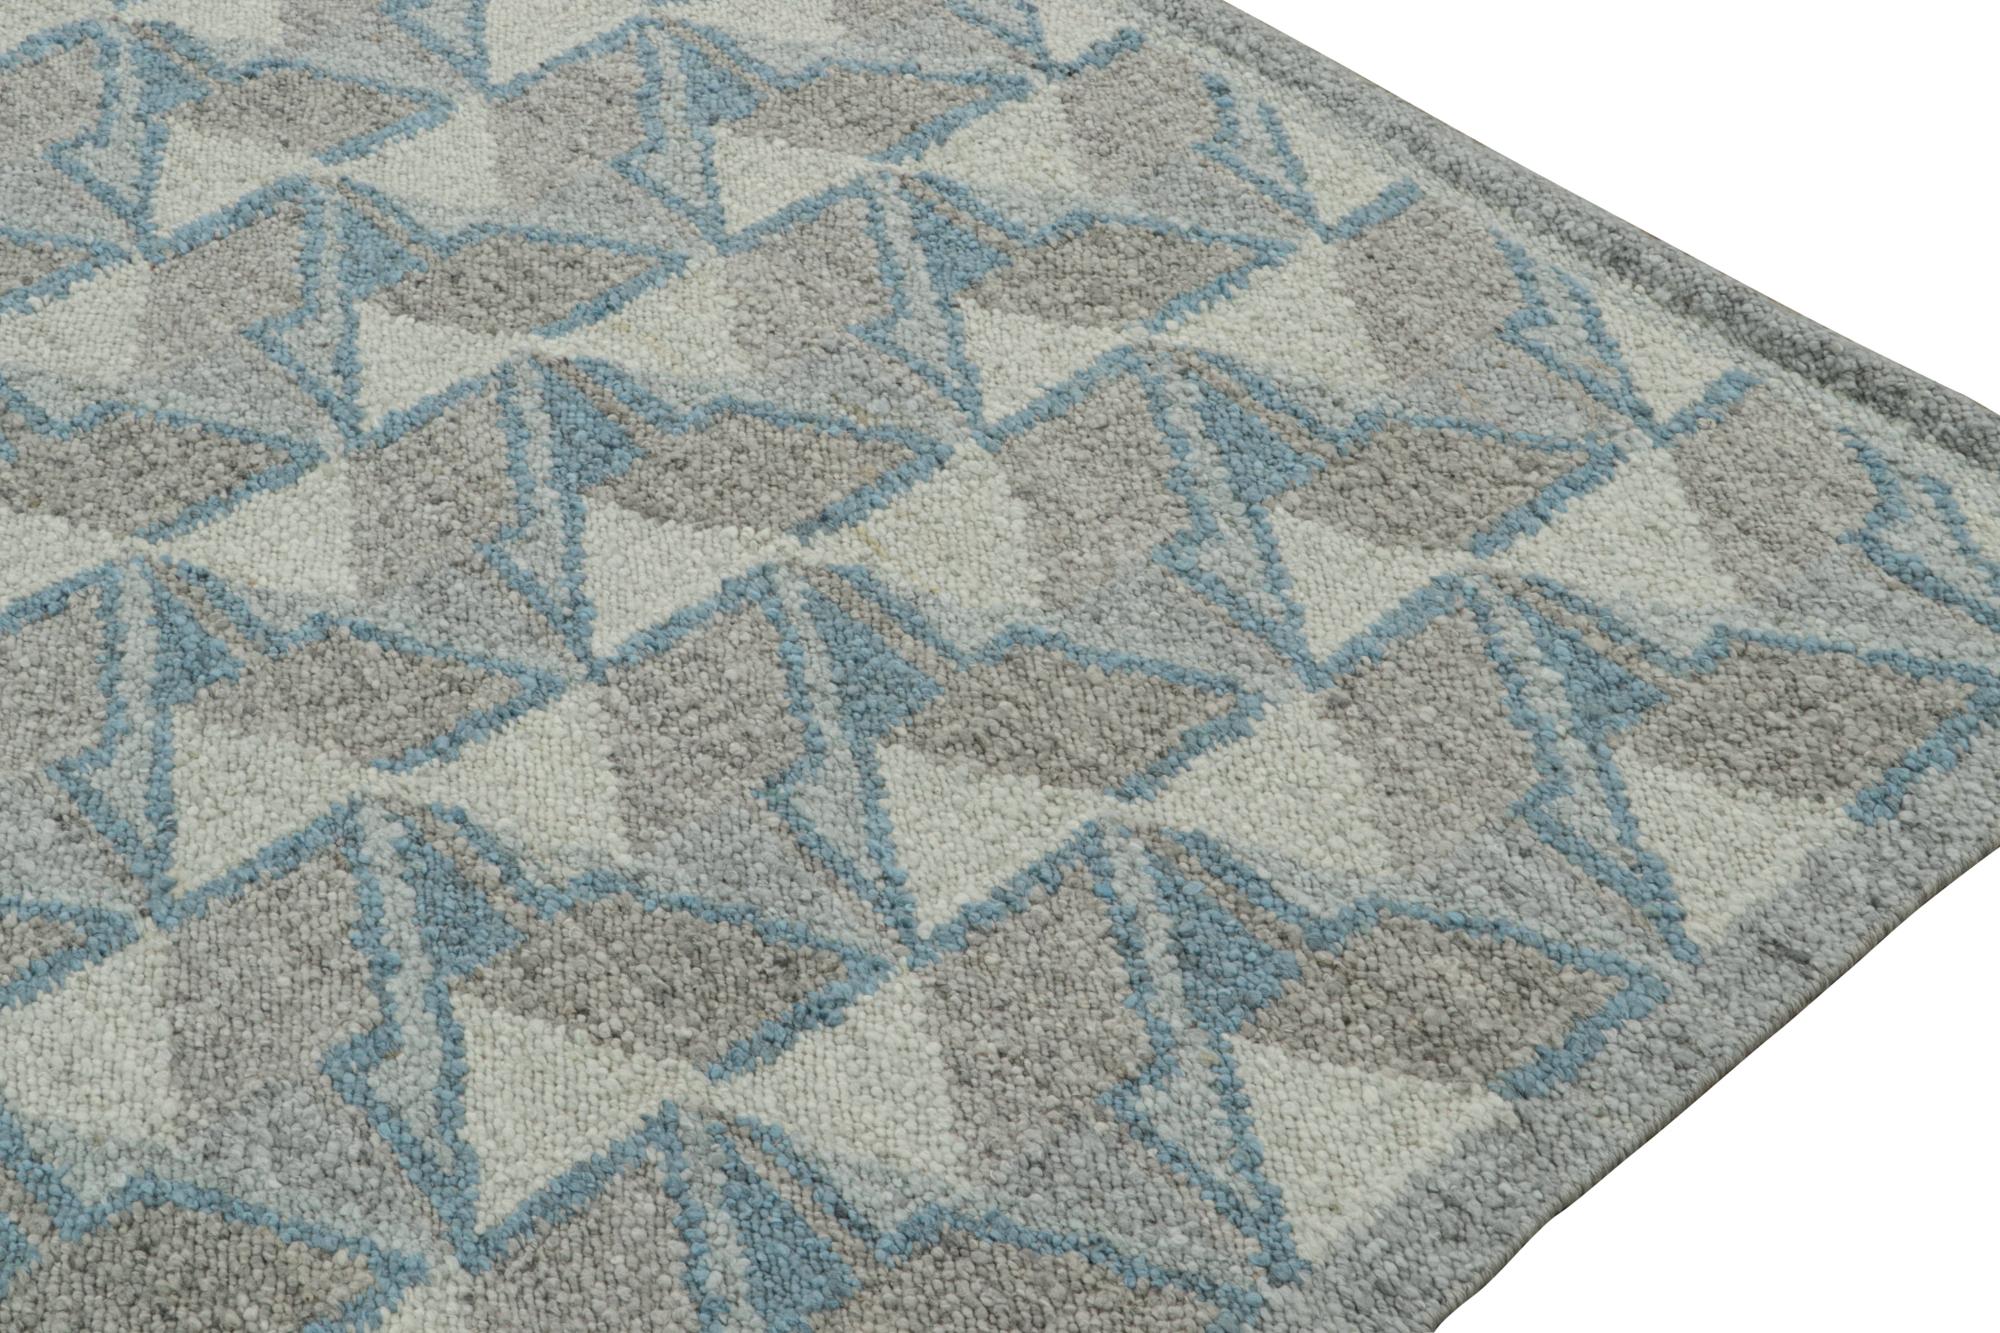 Rug & Kilim’s Scandinavian Style Kilim in Blue & Gray Geometric Patterns In New Condition For Sale In Long Island City, NY